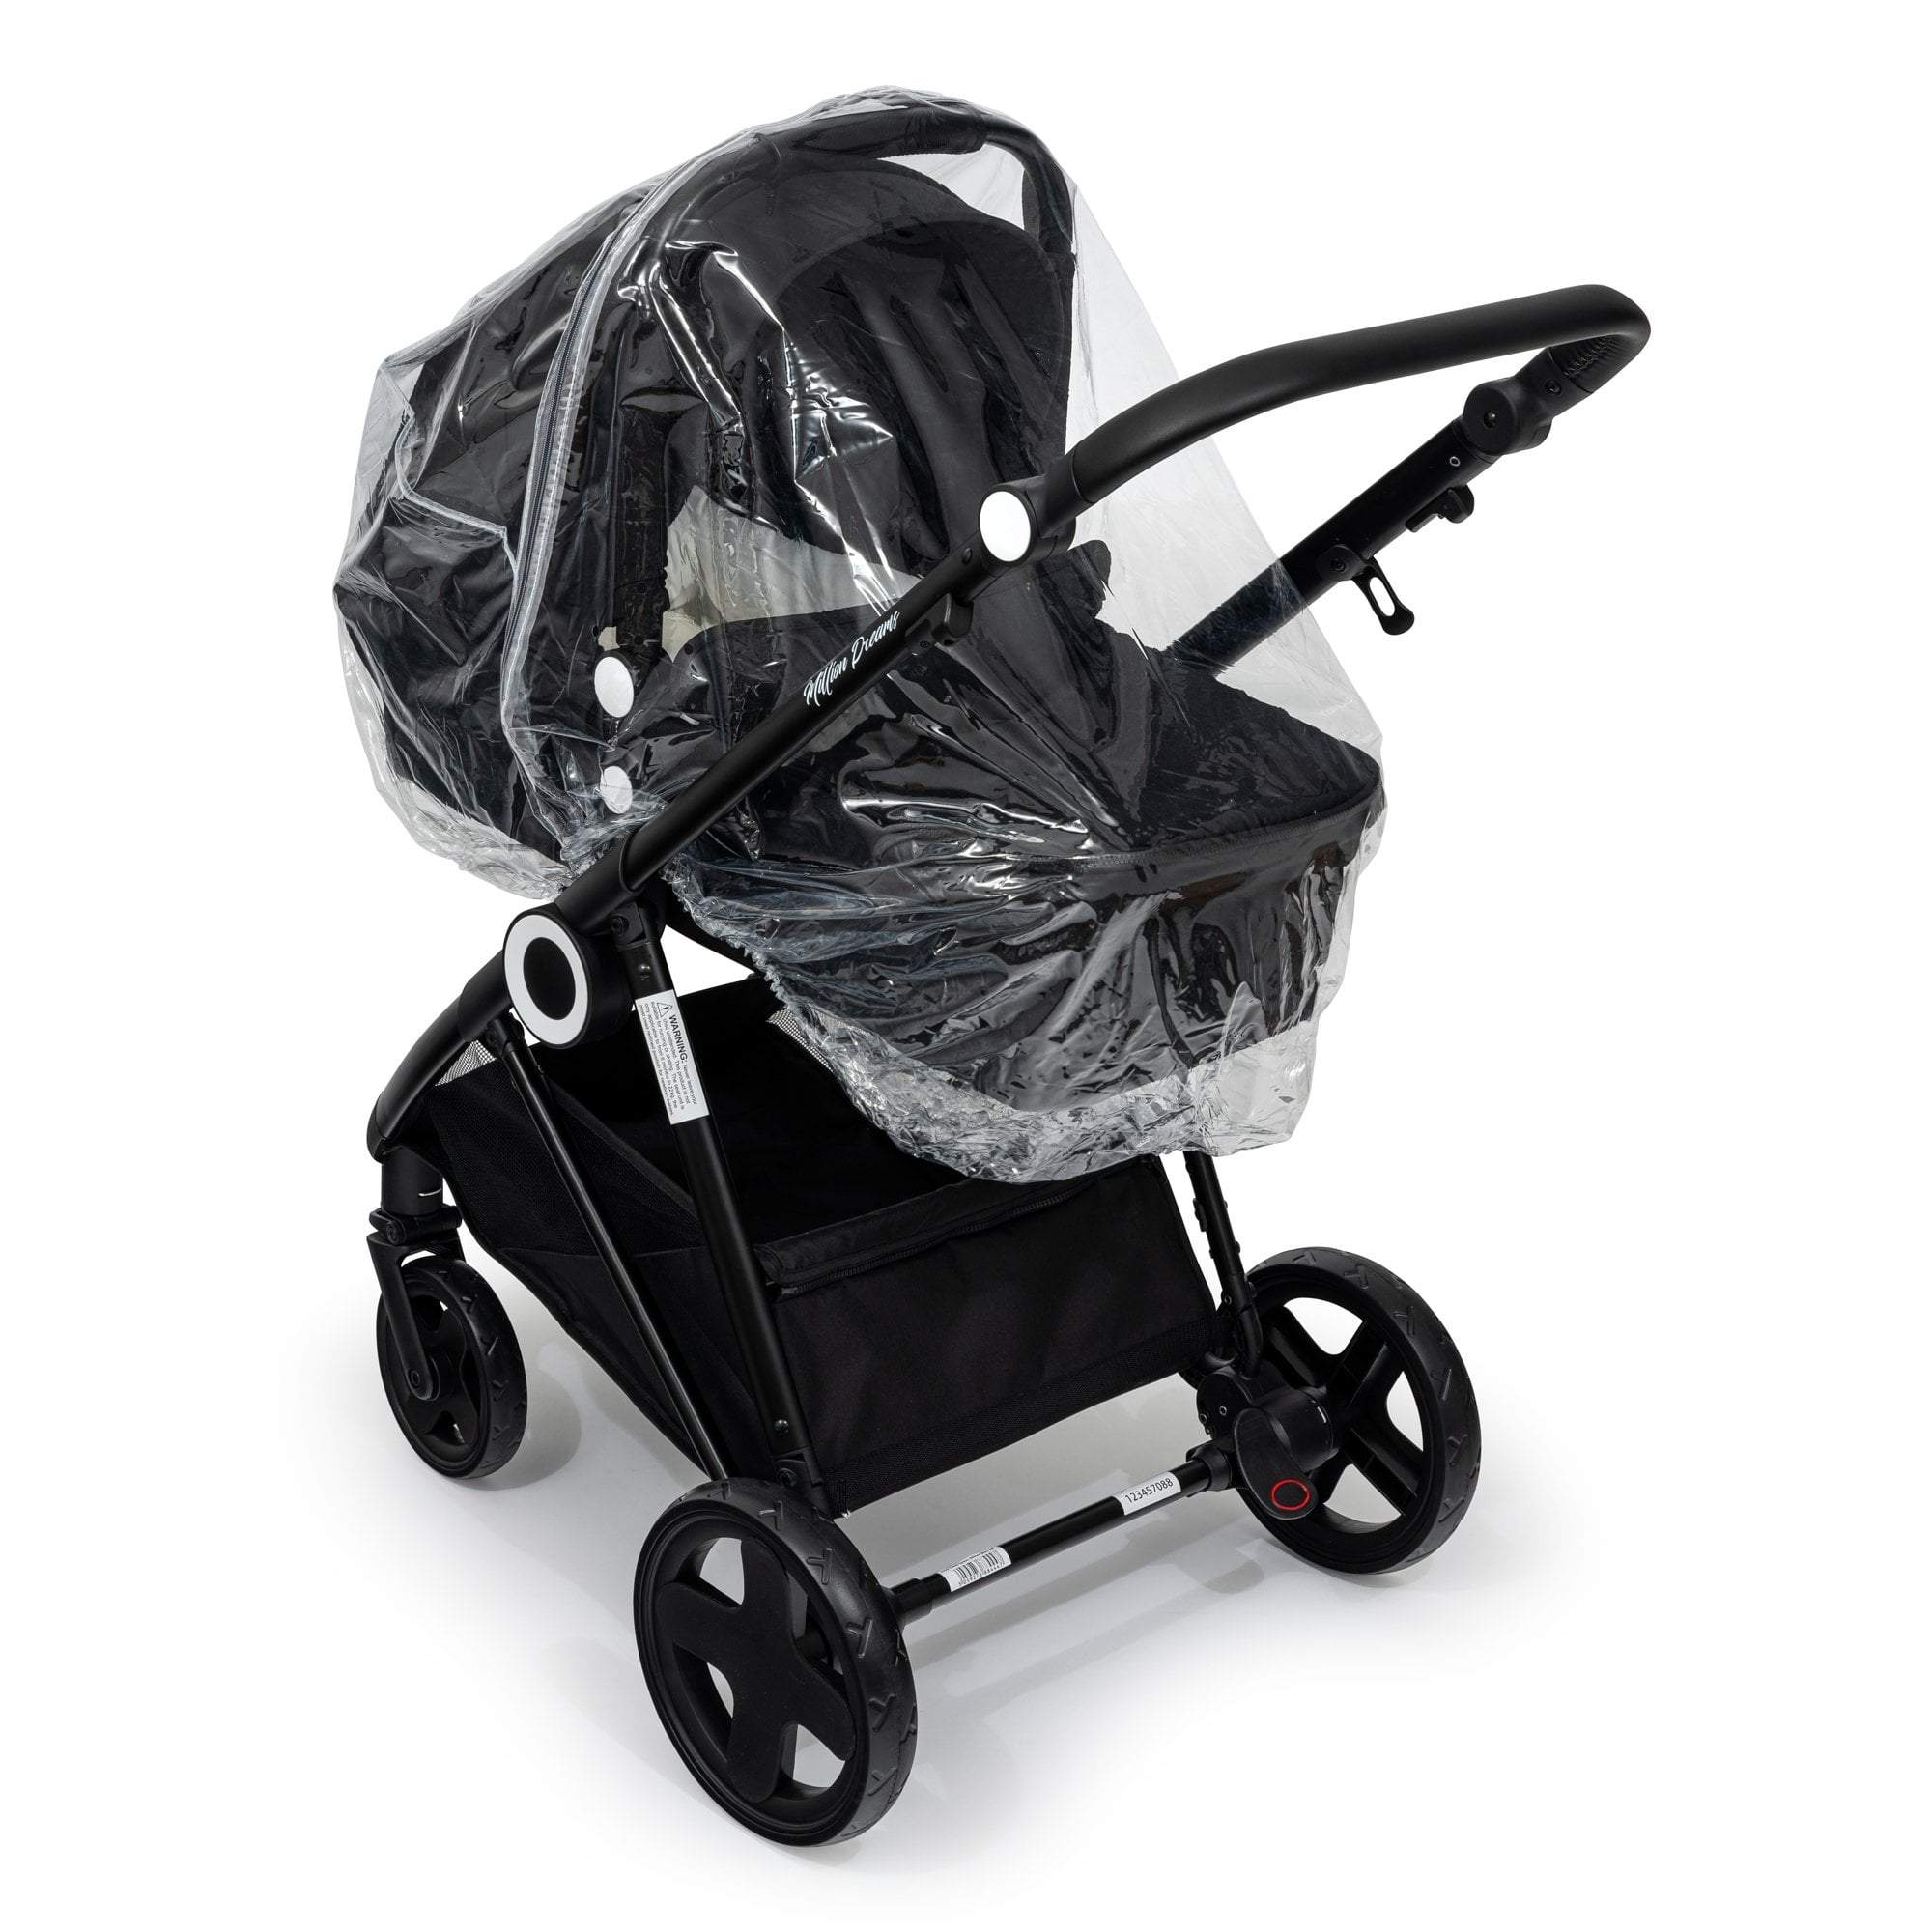 Carrycot Raincover Compatible With Bugaboo - Fits All Models - For Your Little One